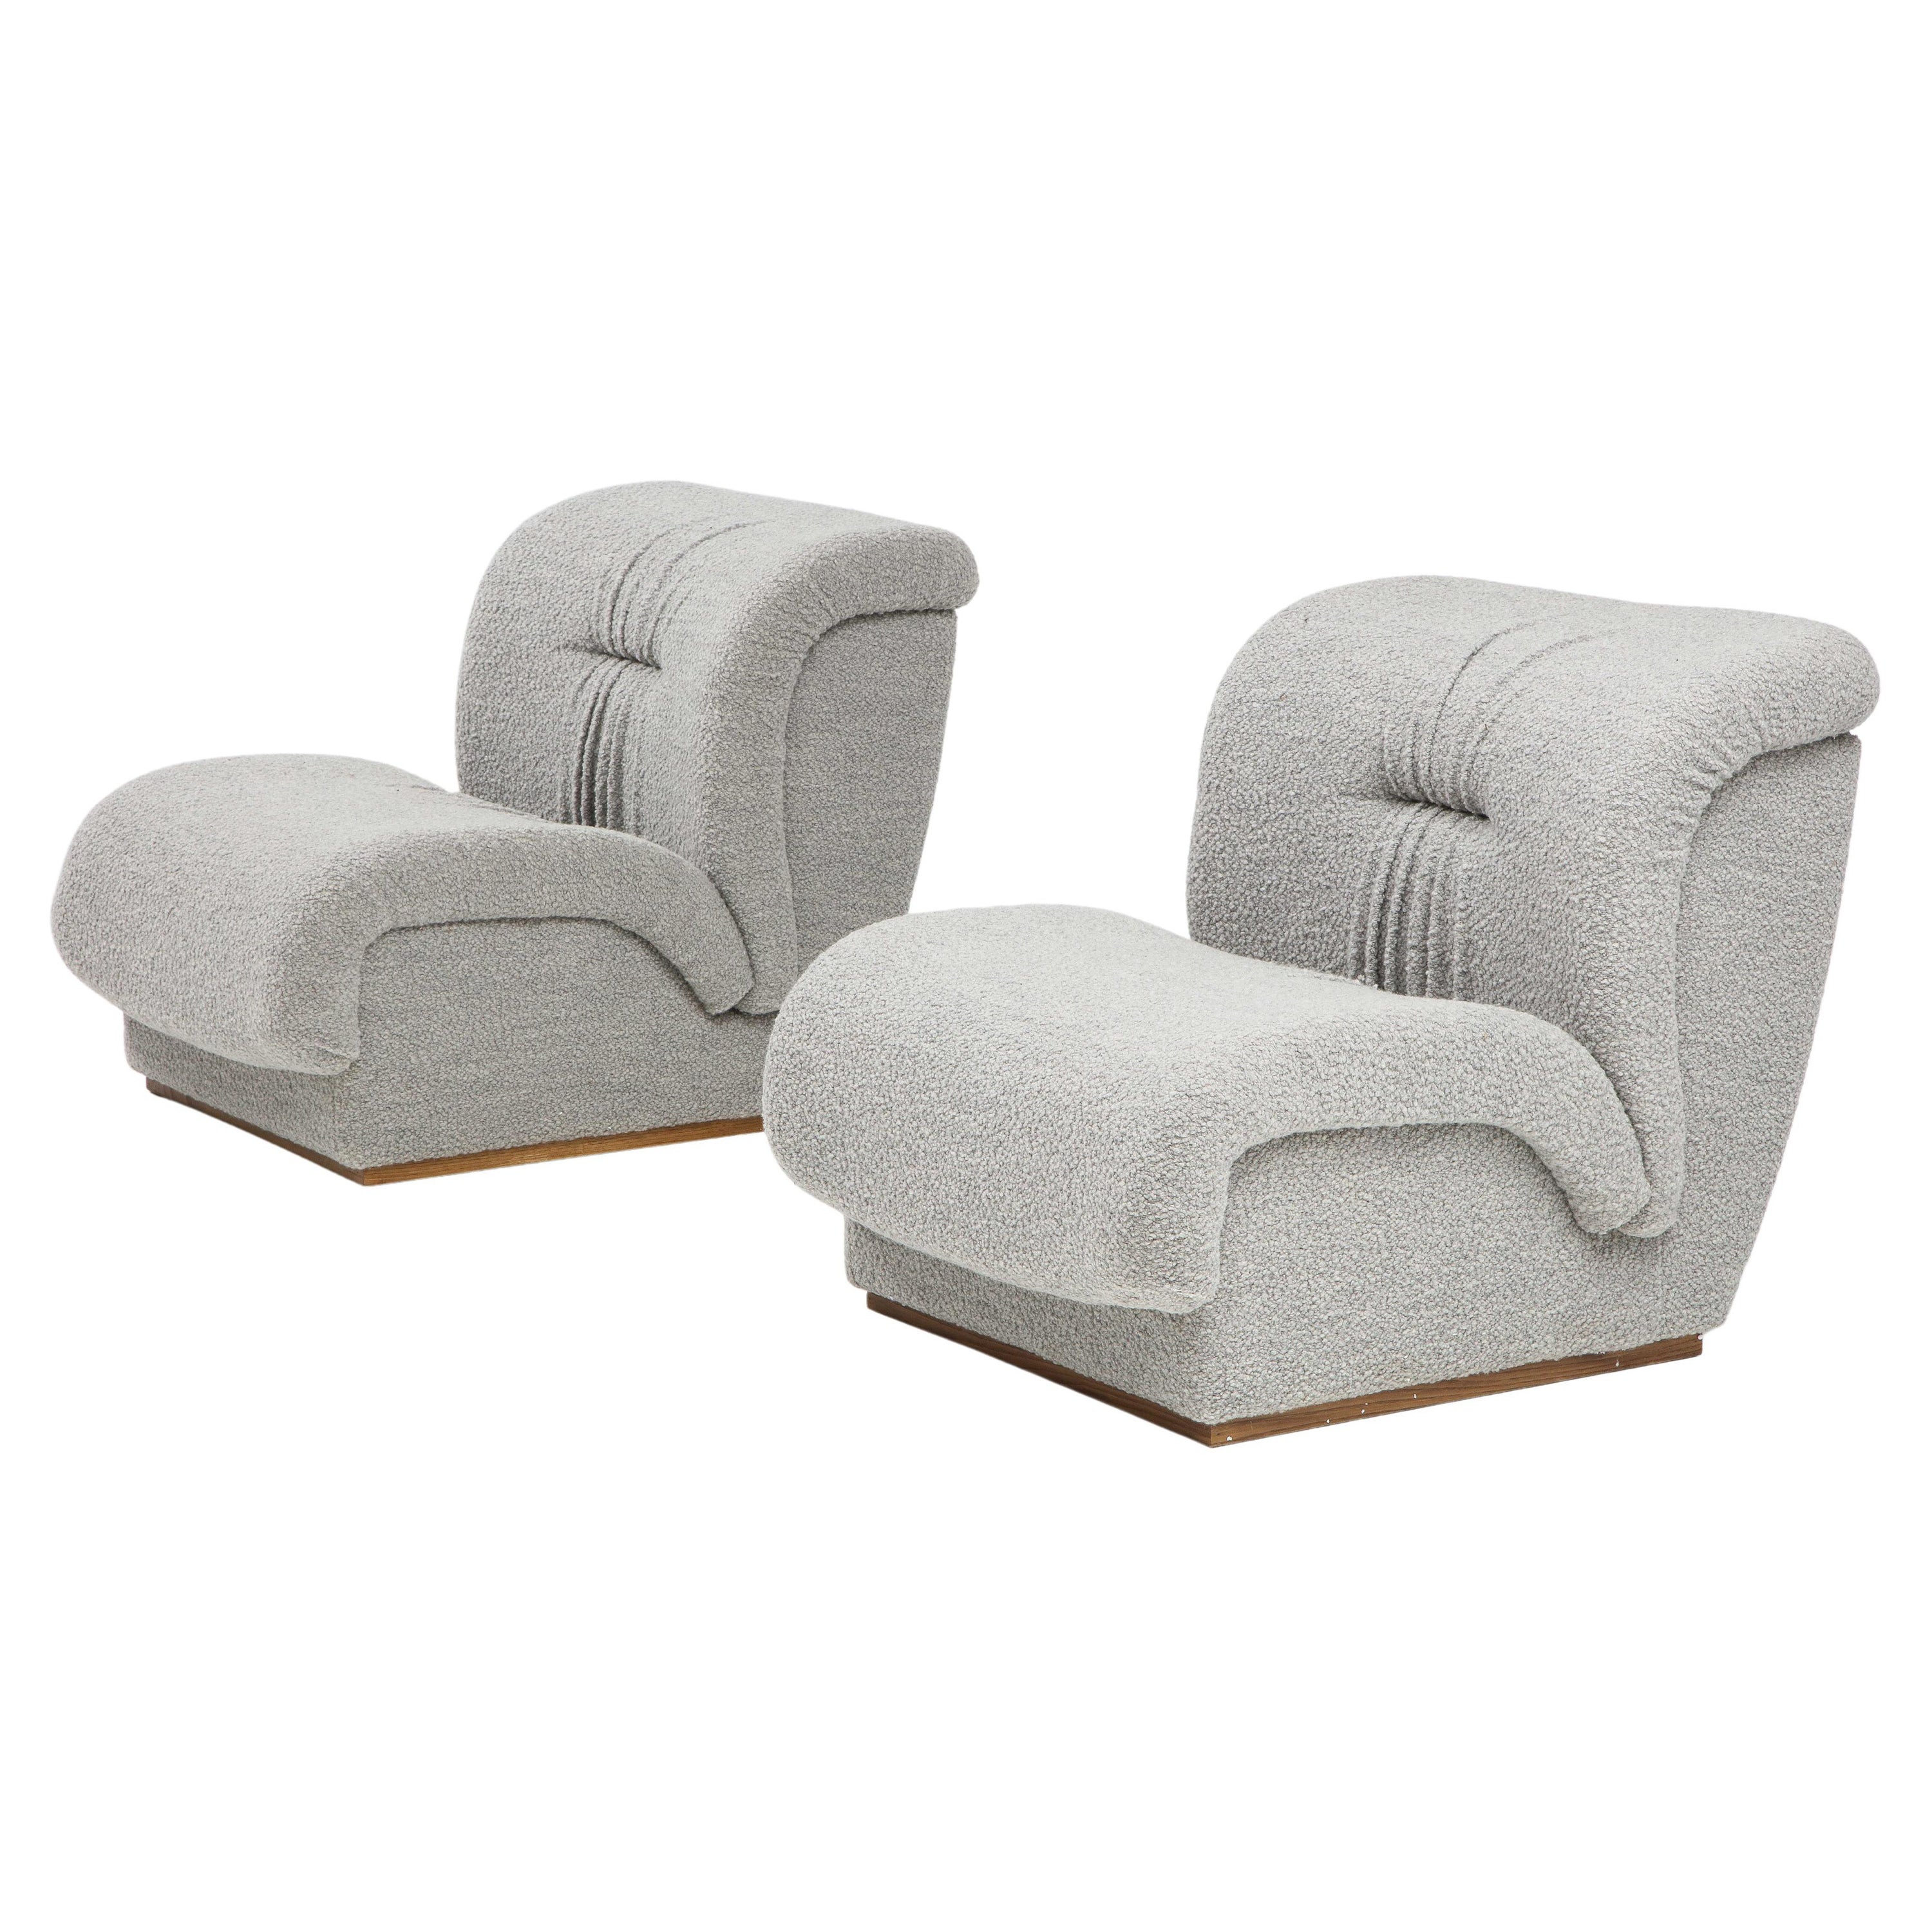 Pair of Slipper Lounge Chairs in Grey Boucle by Doimo Salotti, Italy, circa 1970 For Sale